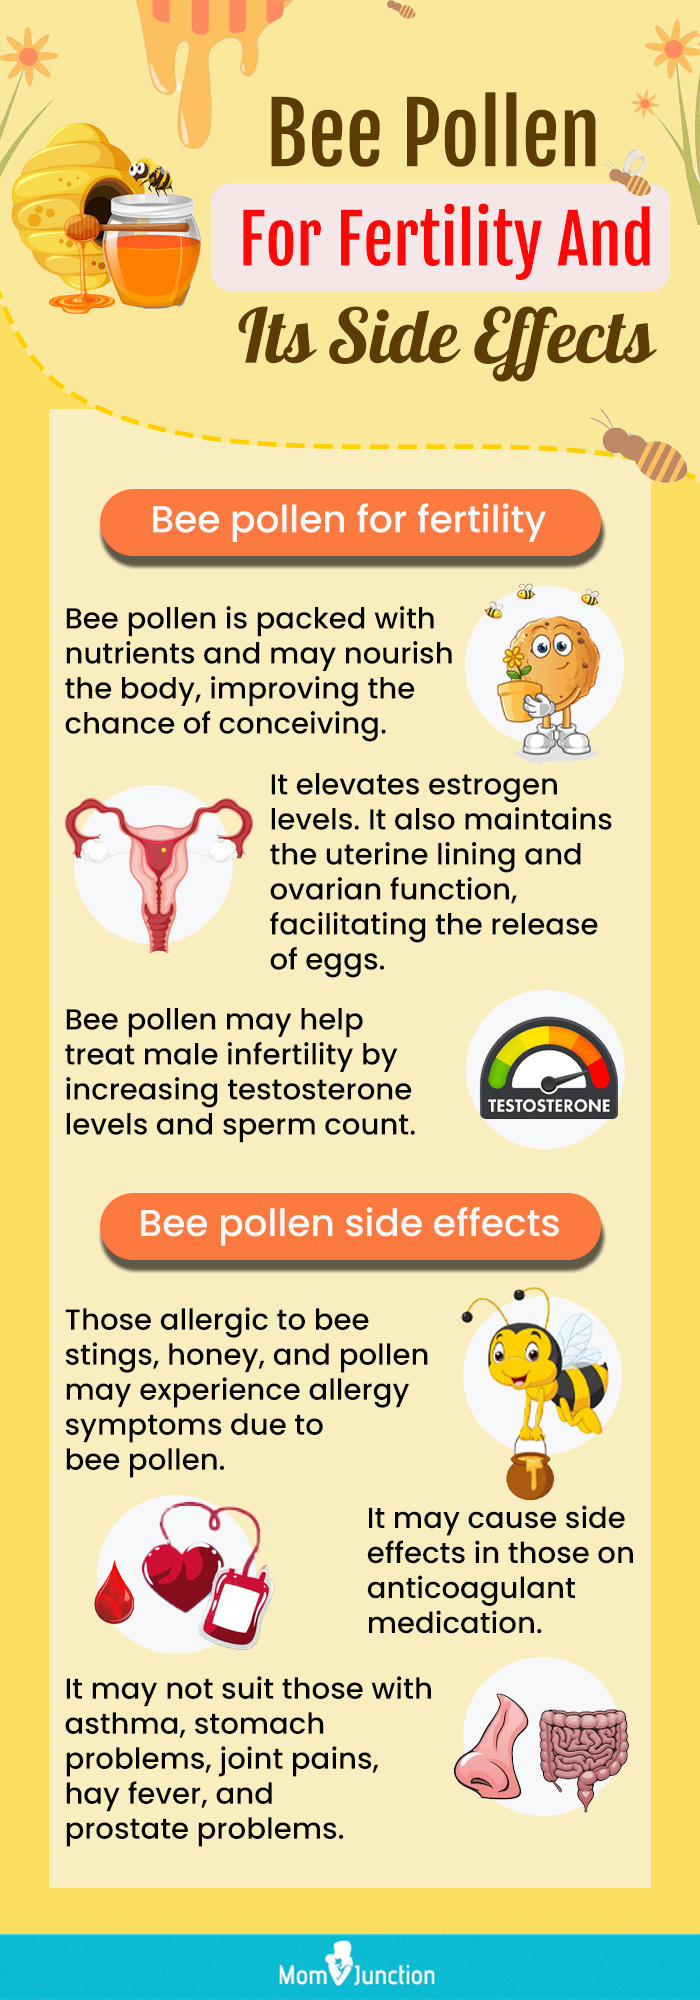 Bee Pollen And Fertility: Everything You Need To Know